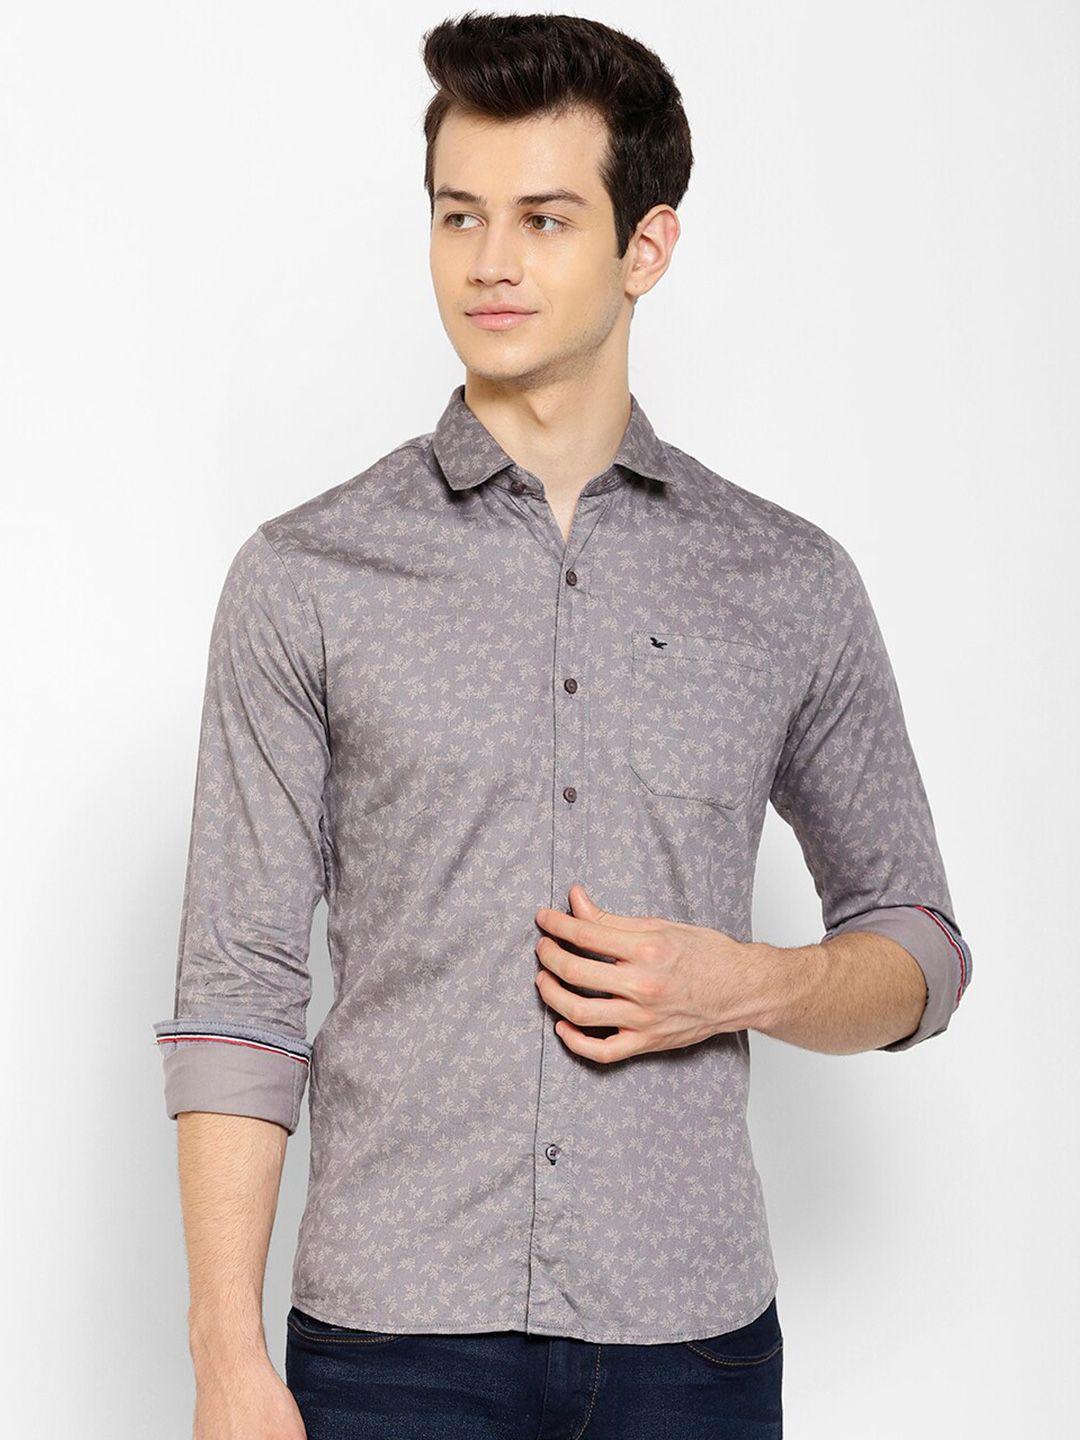 cape-canary-men-grey-smart-floral-printed-casual-cotton-shirt